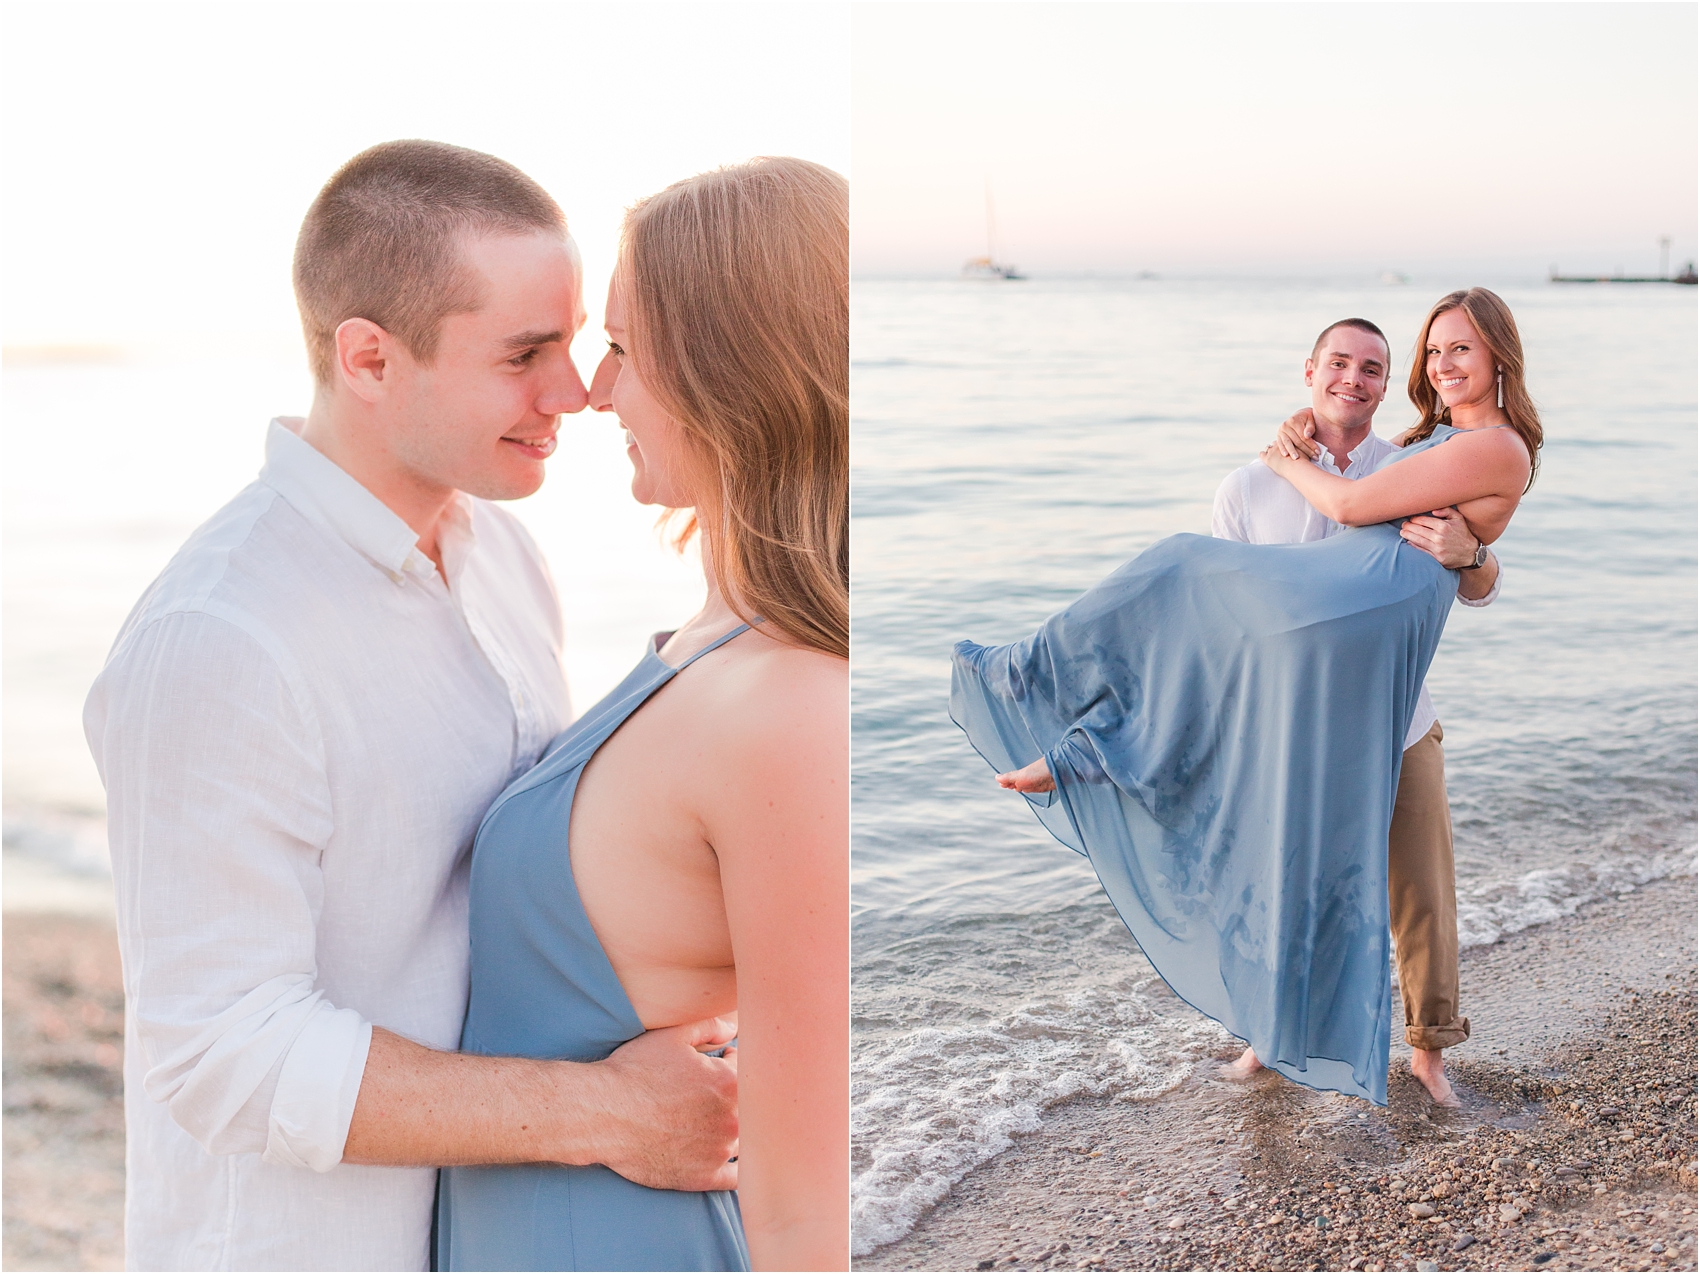 romantic-sunset-engagement-photos-at-michigan-beach-park-in-charlevoix-mi-by-courtney-carolyn-photography_0013.jpg